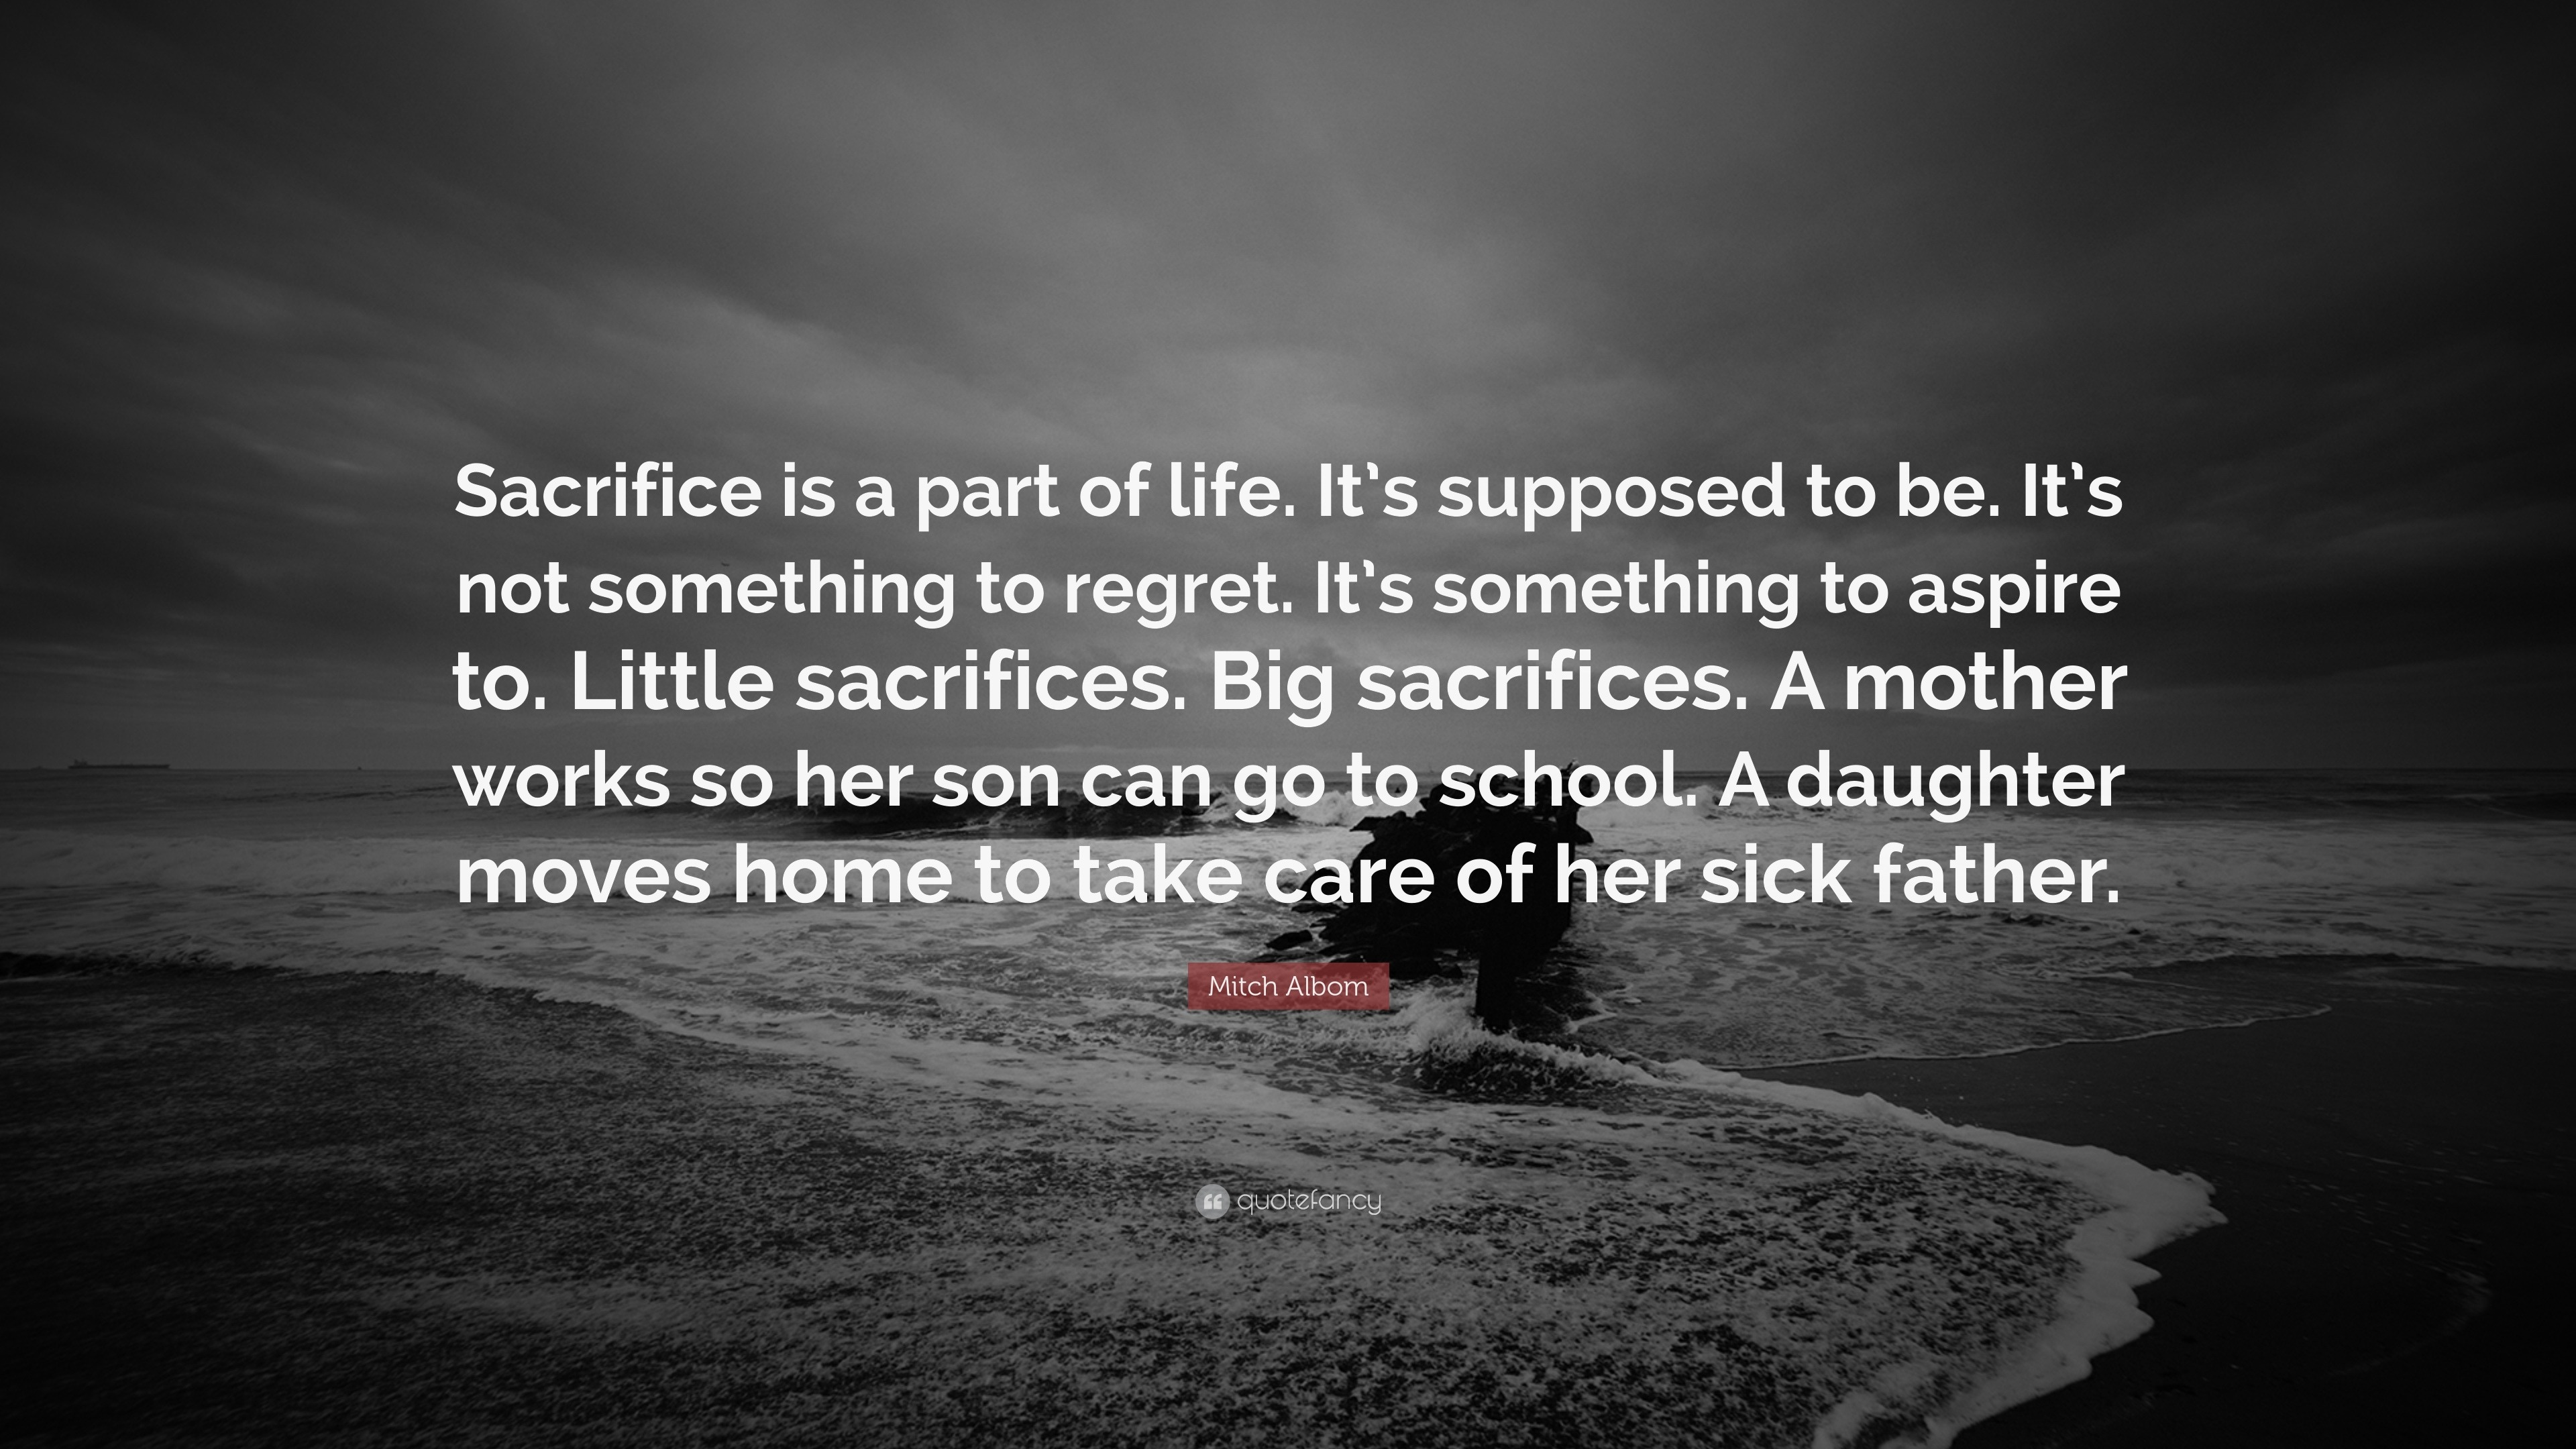 Mitch Albom Quote “Sacrifice is a part of life It s supposed to be